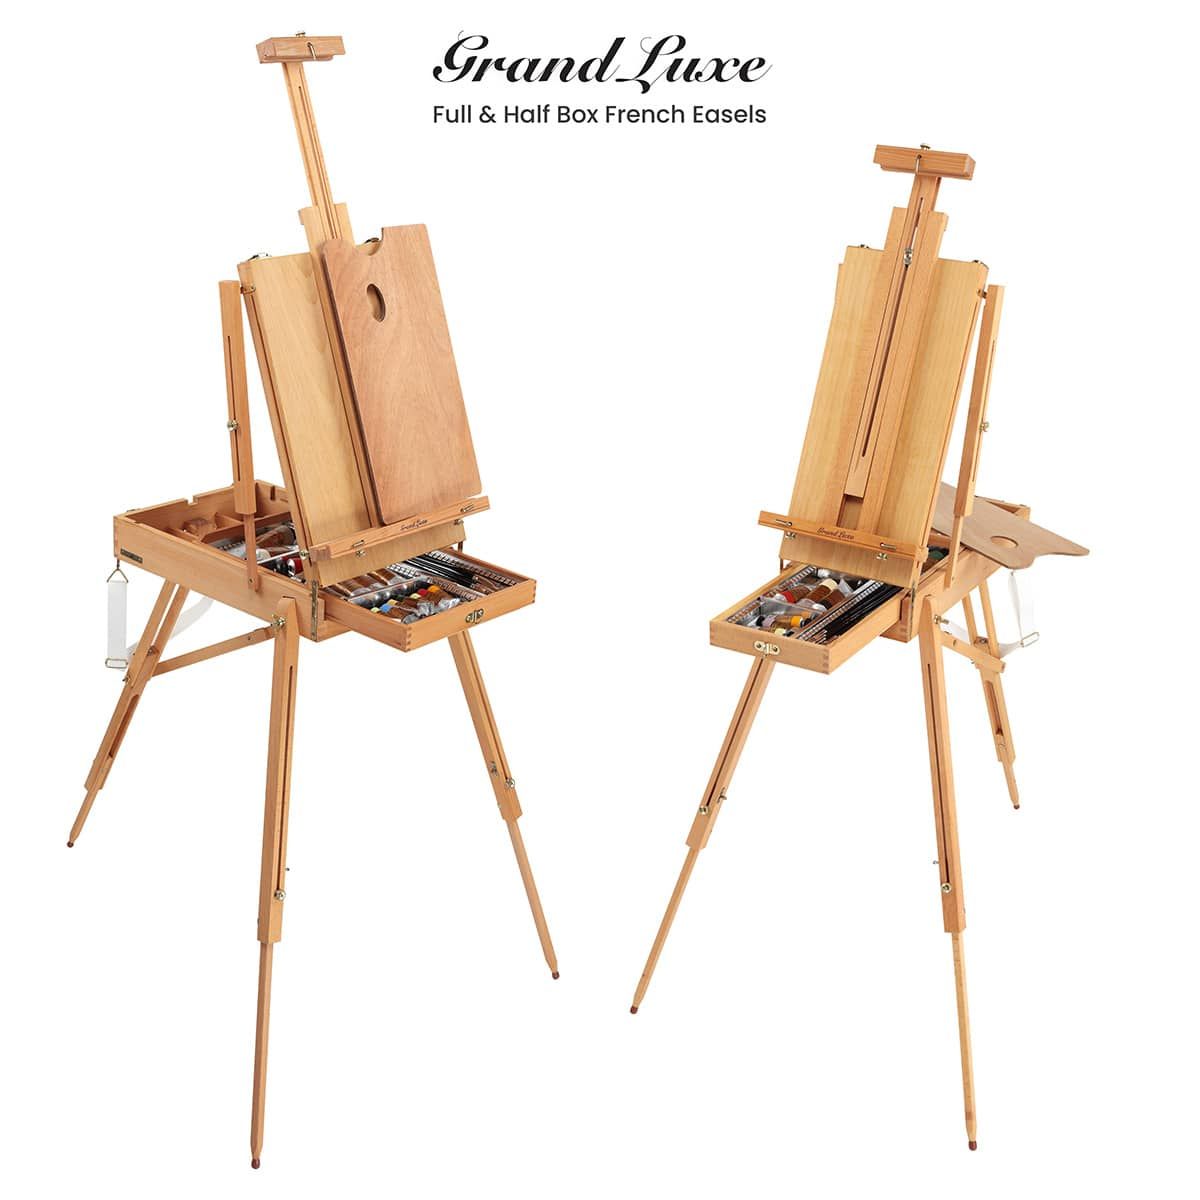 Grand Luxe French Easels